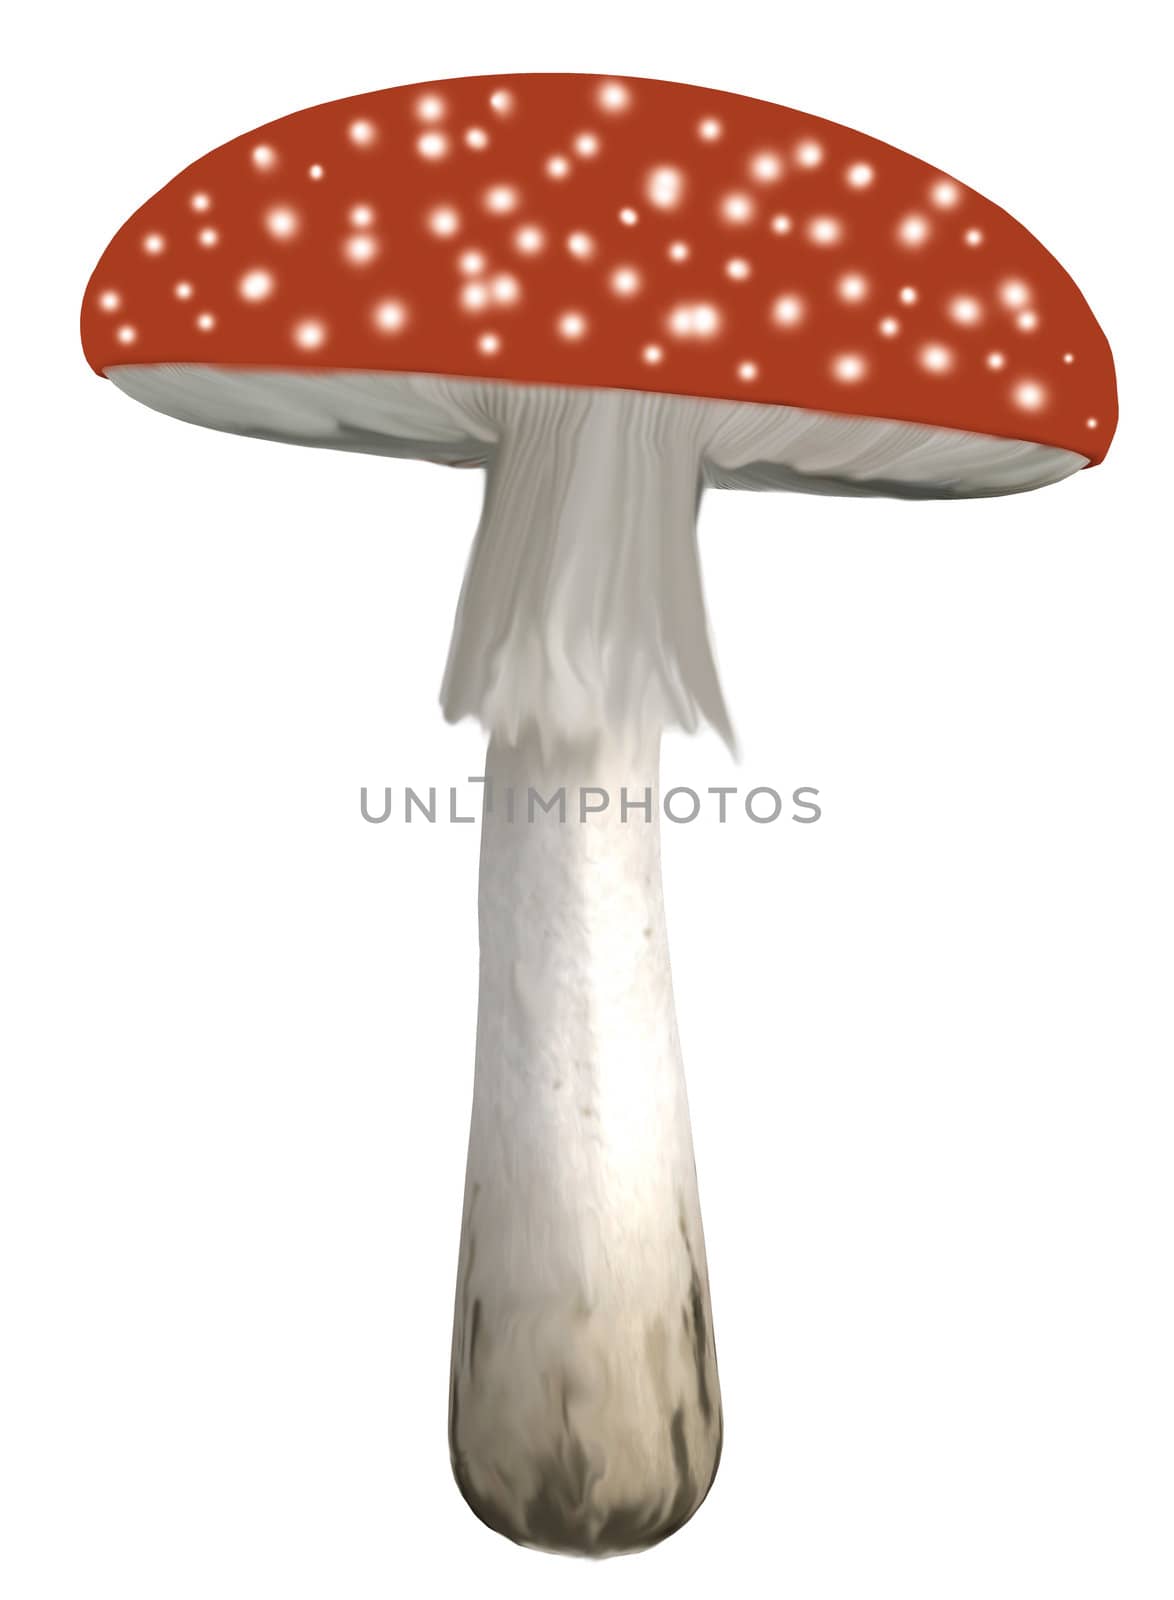 Red mushroom with white polka dots on a white background